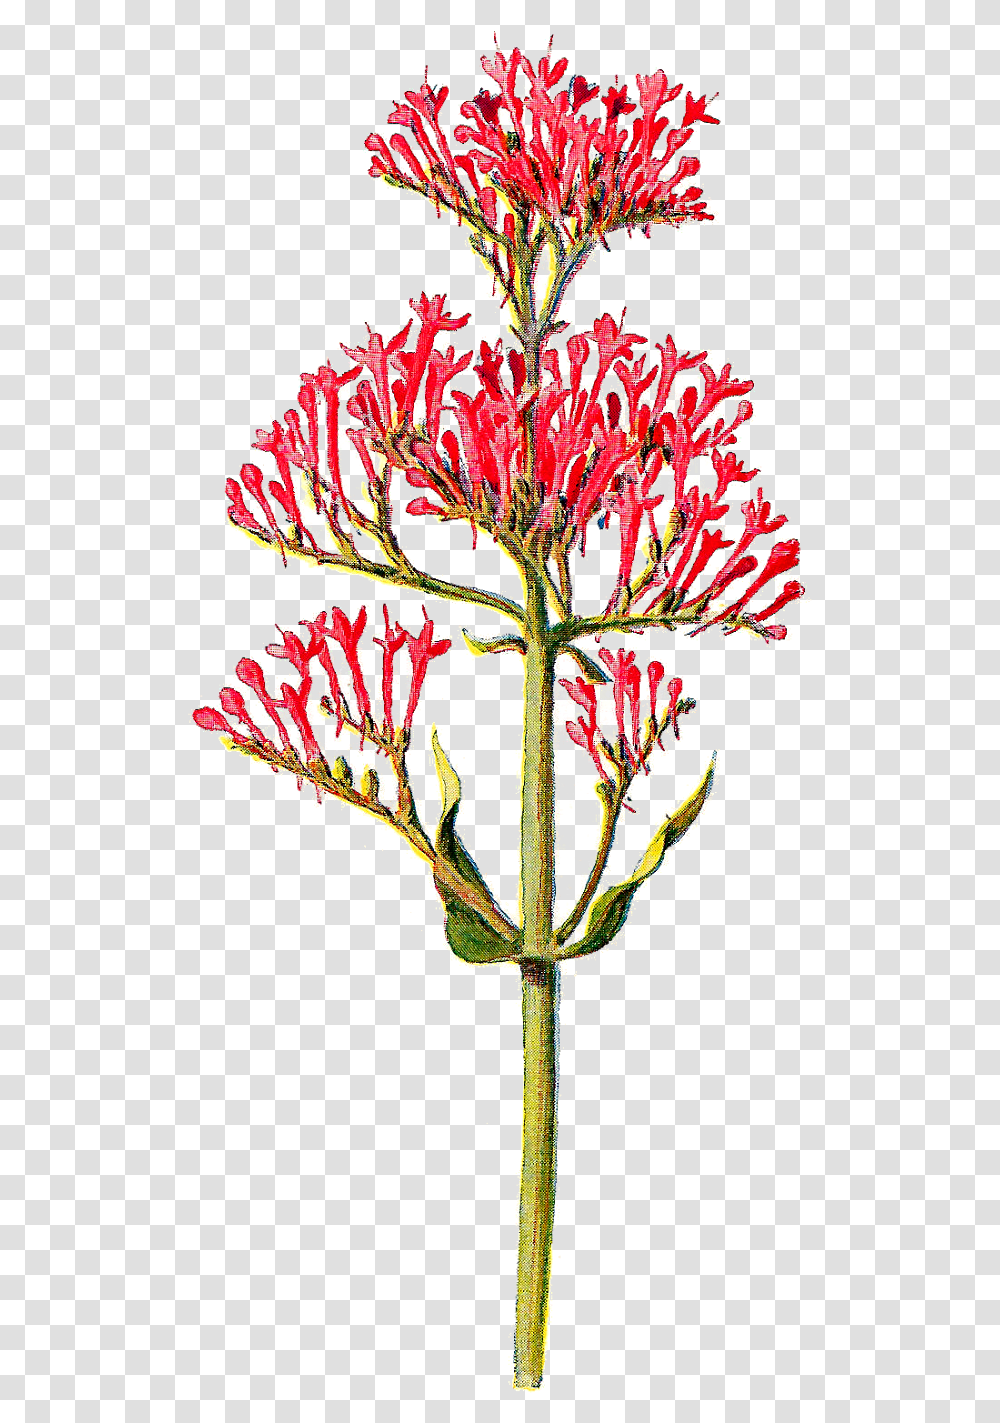 Tiny Flower Picture Royalty Free Red Valerian Flowers Drawing, Plant, Blossom, Pollen, Bud Transparent Png